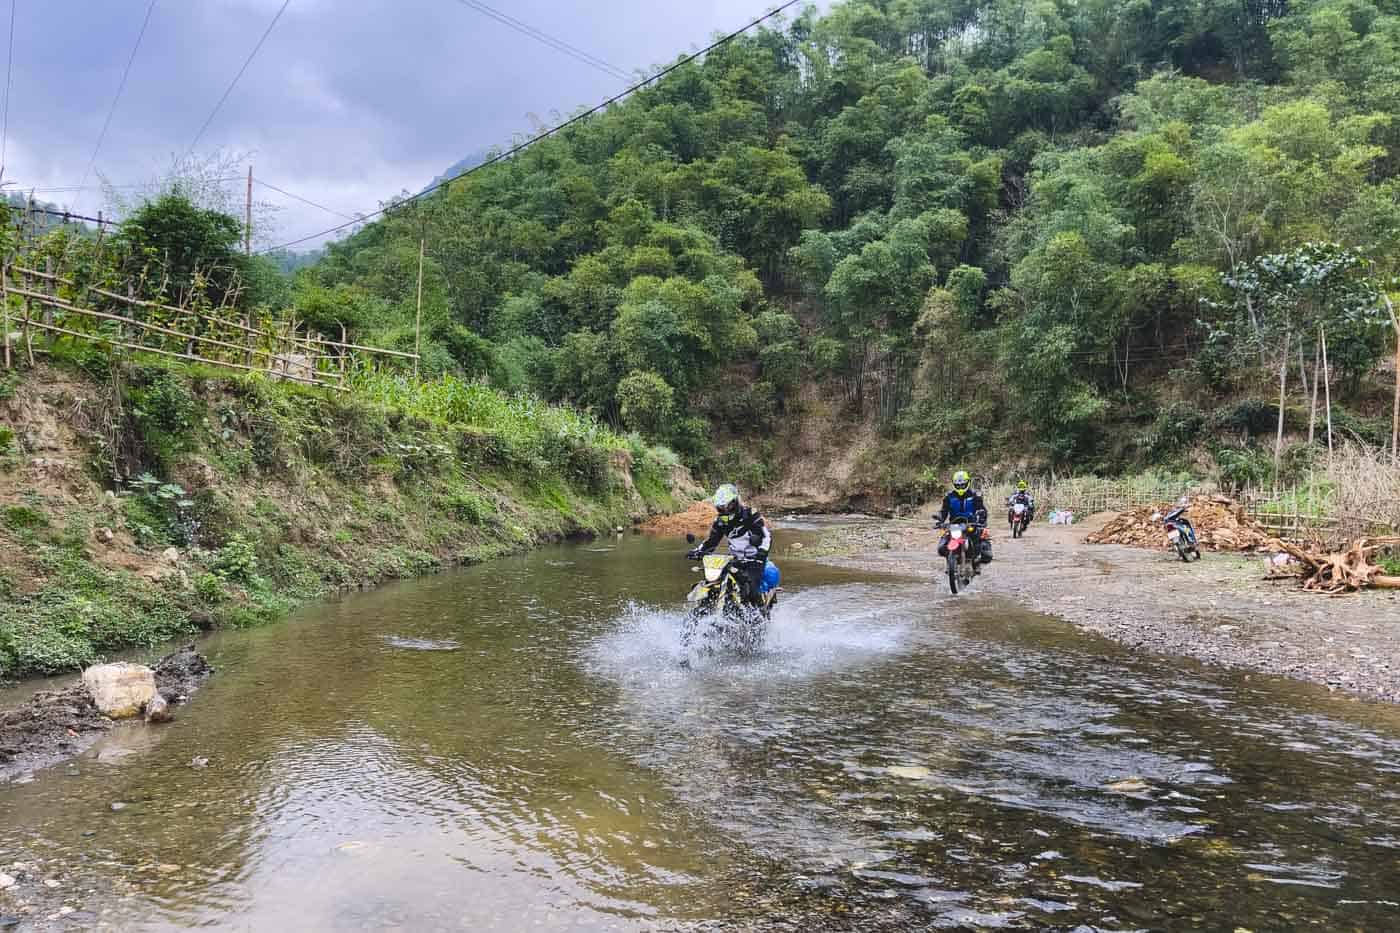 Crossing a river while offroad and getting splashed.